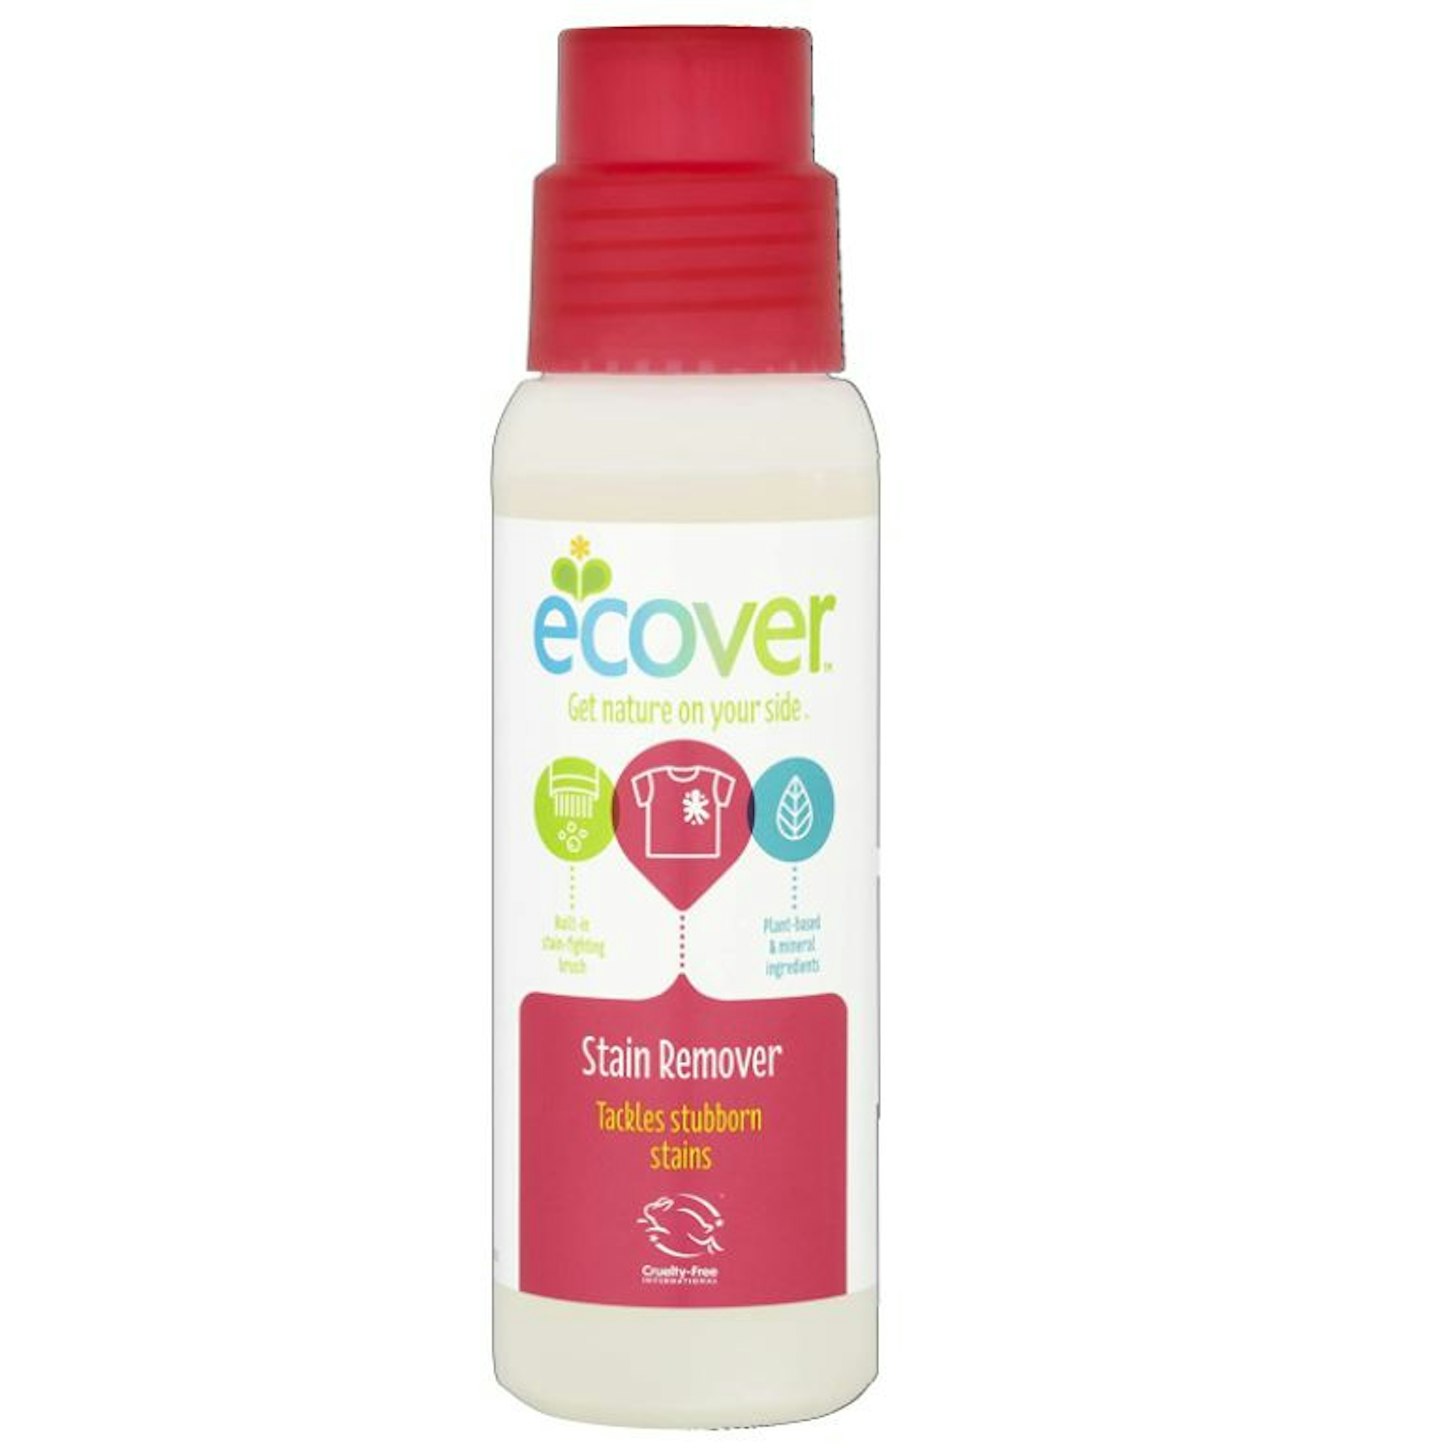 Ecover stain remover